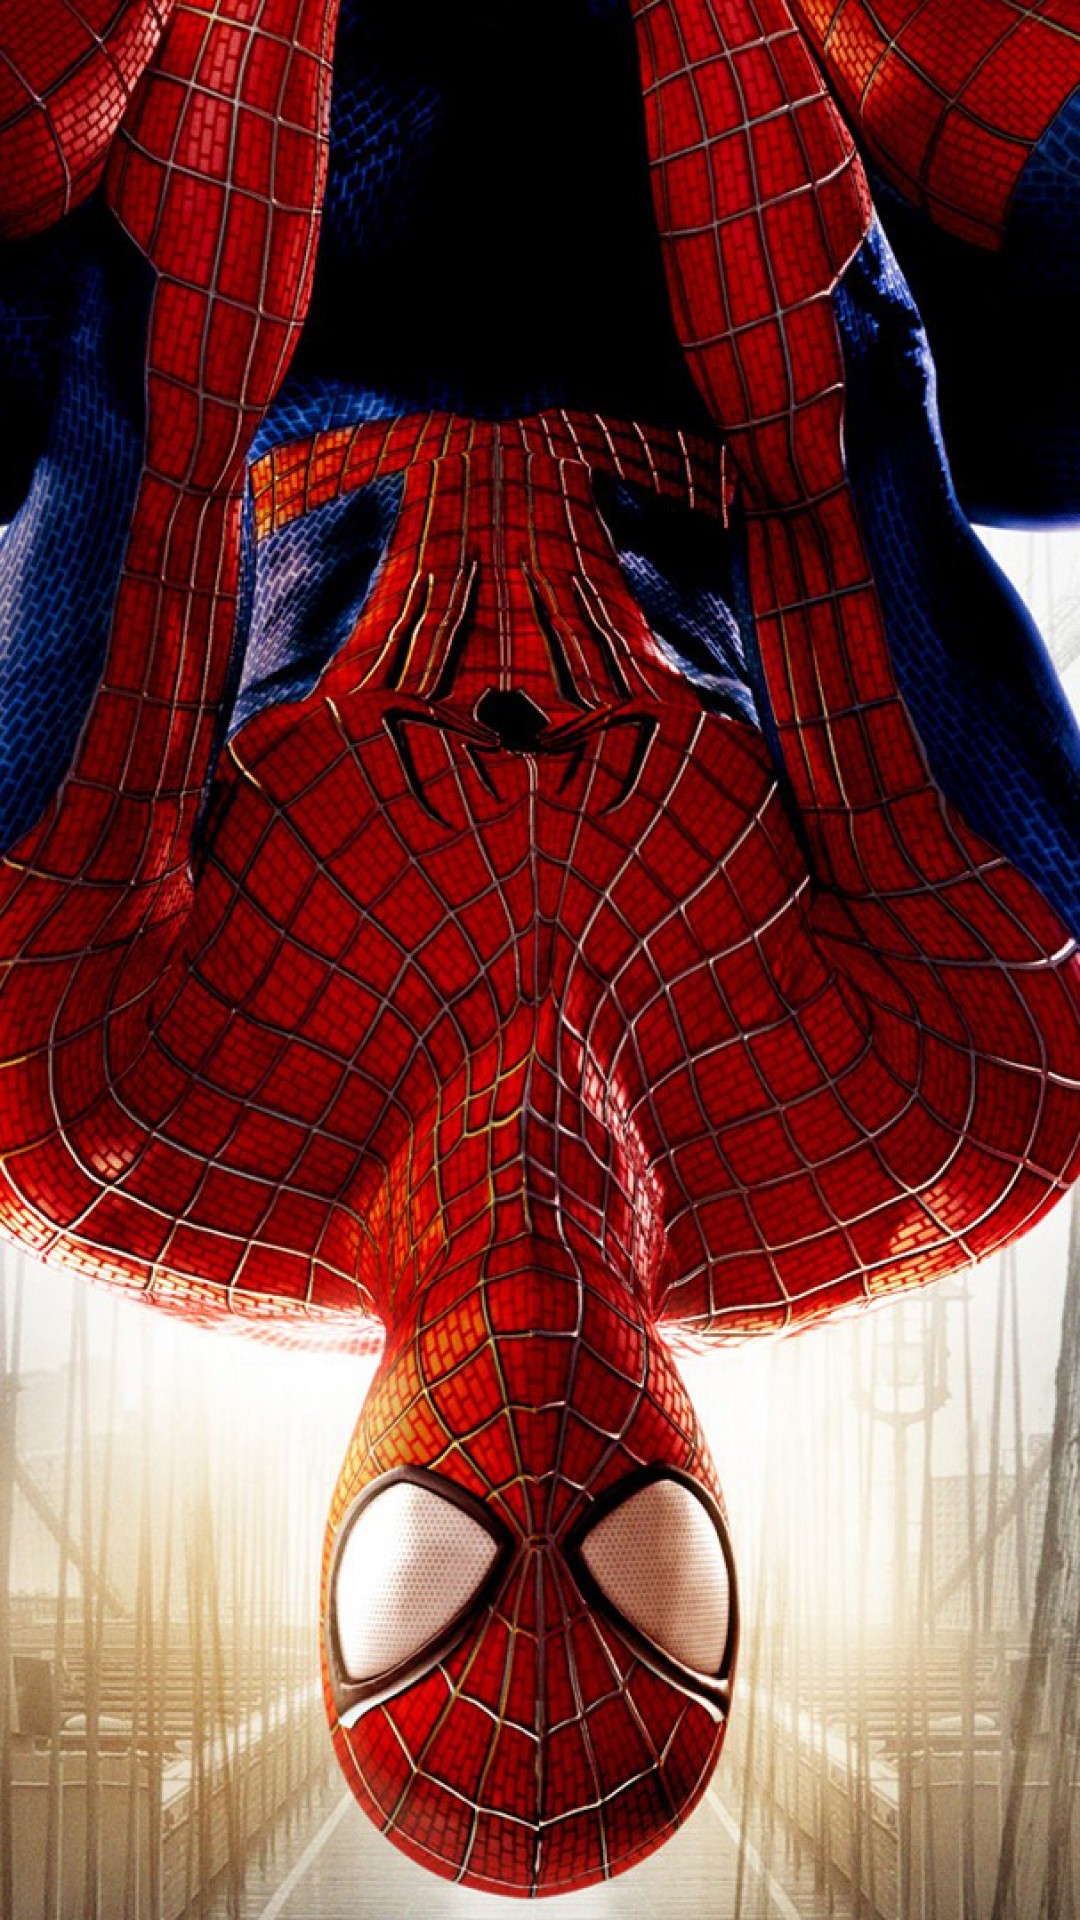 1080x1920 wallpaper.wiki-Spiderman-Image-for-Iphone-Download-Free-